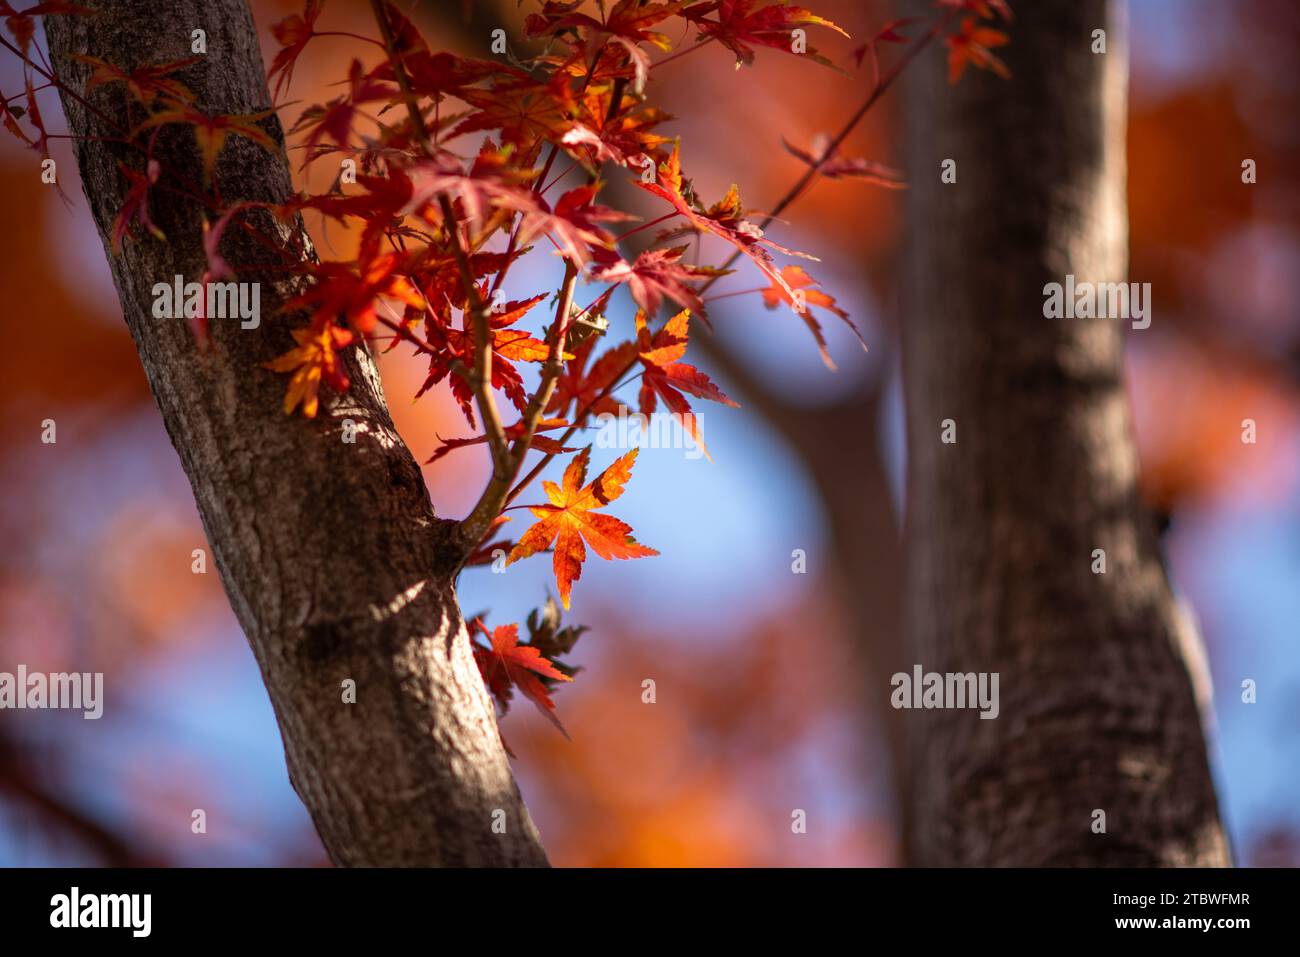 Red leaves foliage in Japan during the Momiji autumn season when trees light up in bright oranges and reds Stock Photo